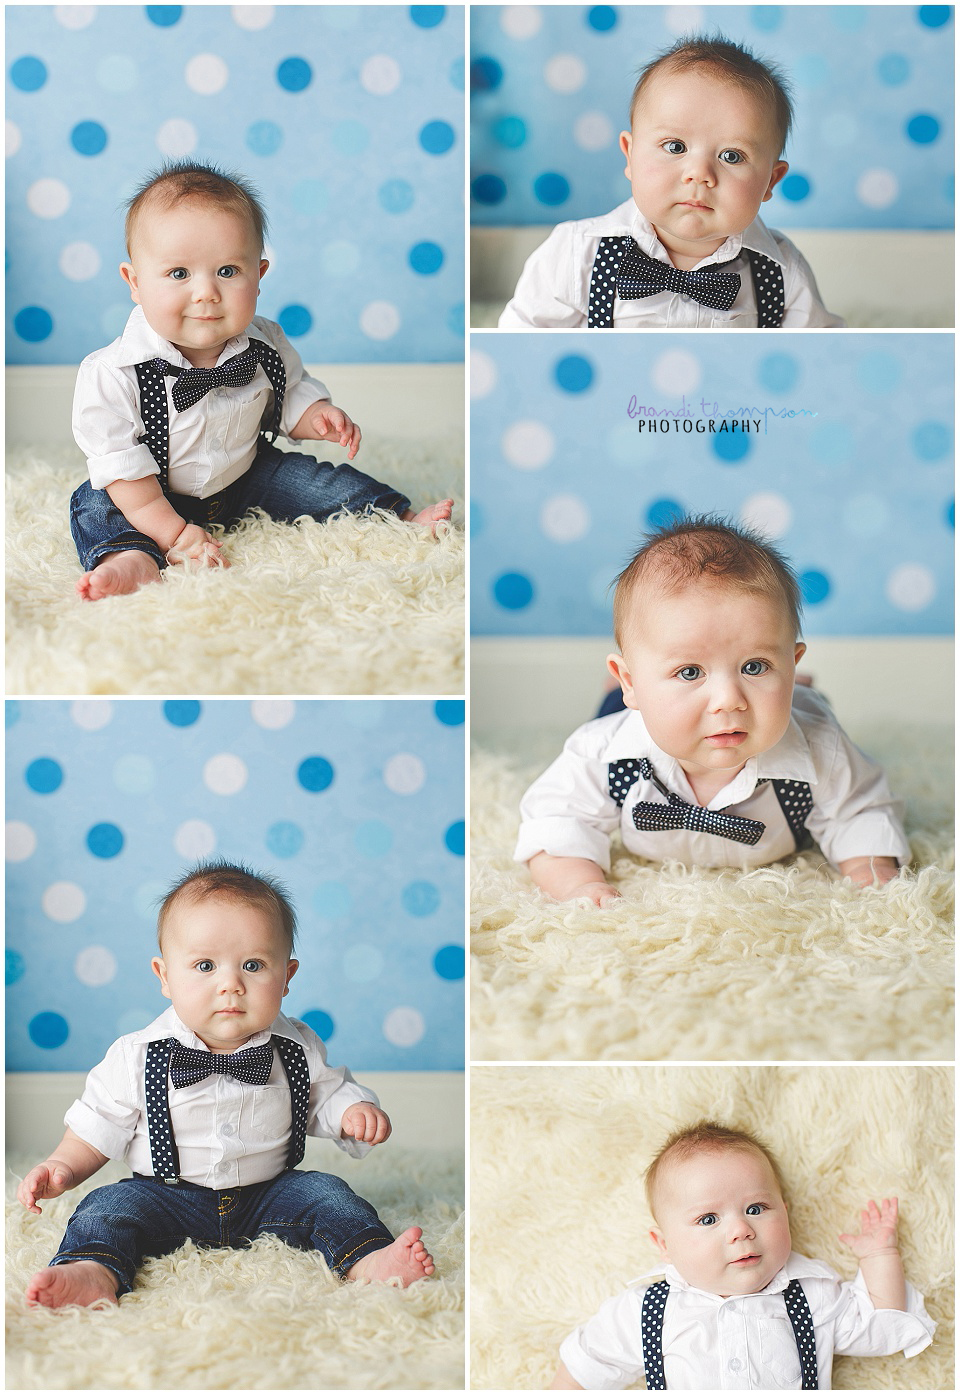 six month old baby boy in plano, tx photography studio